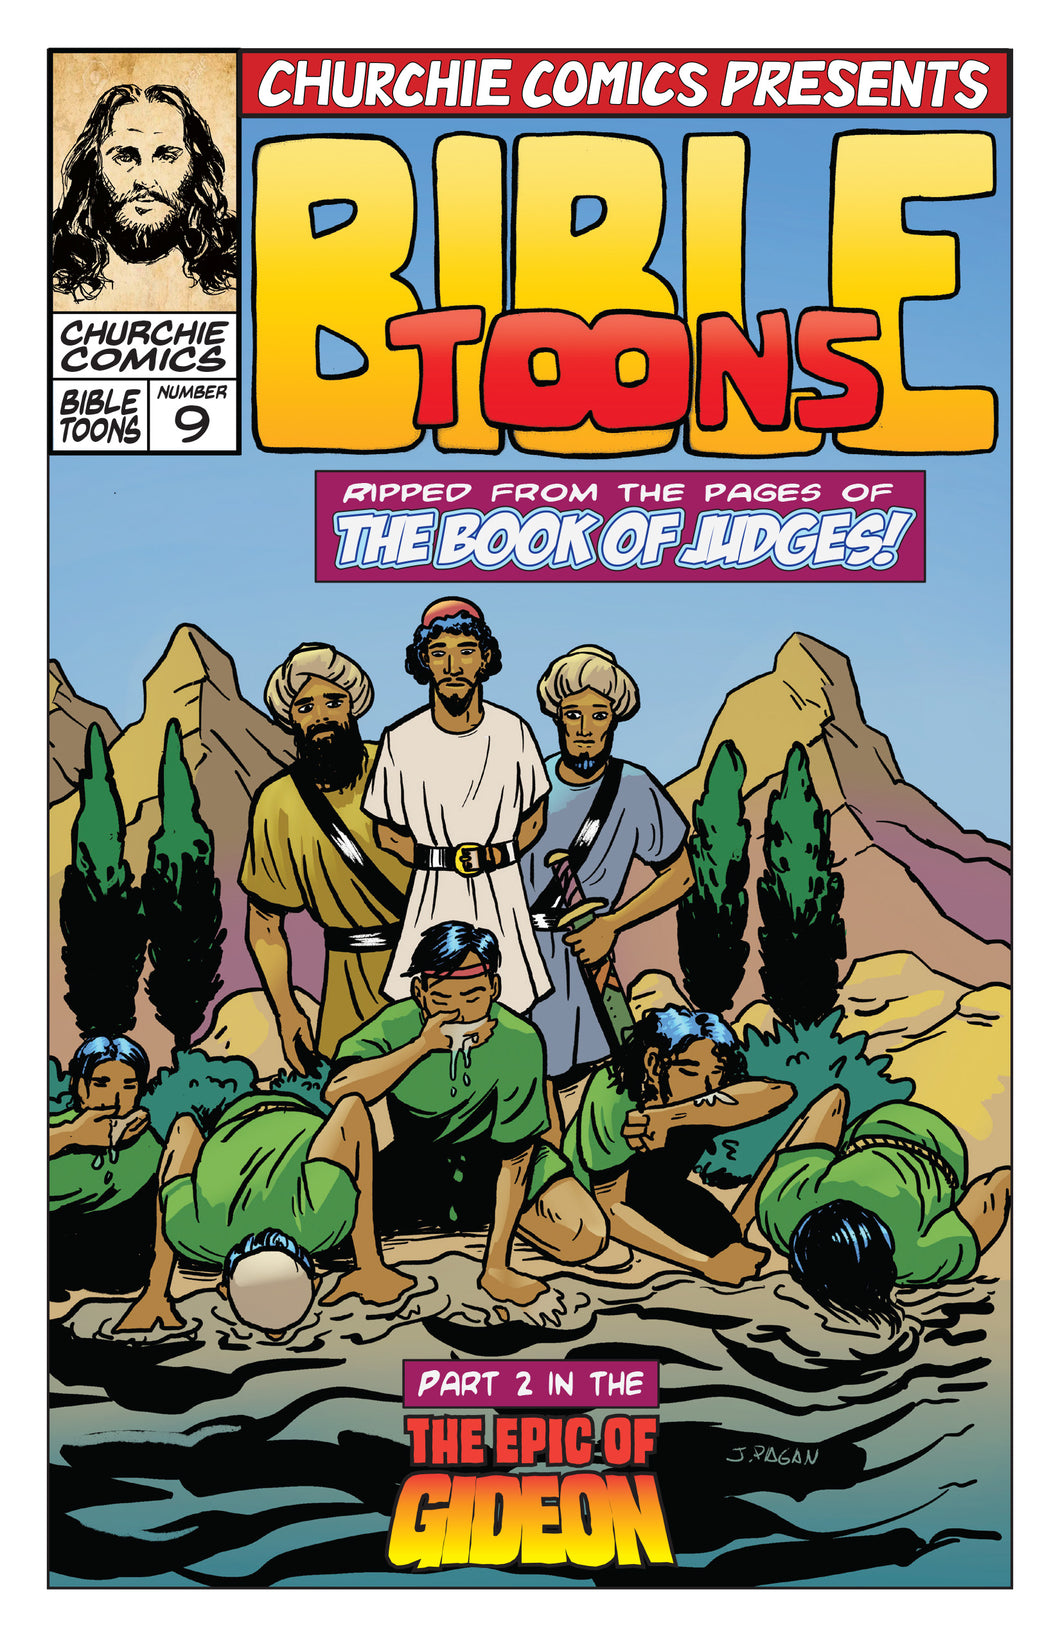 Bible-toons #09 - The Epic of Gideon, Part 2